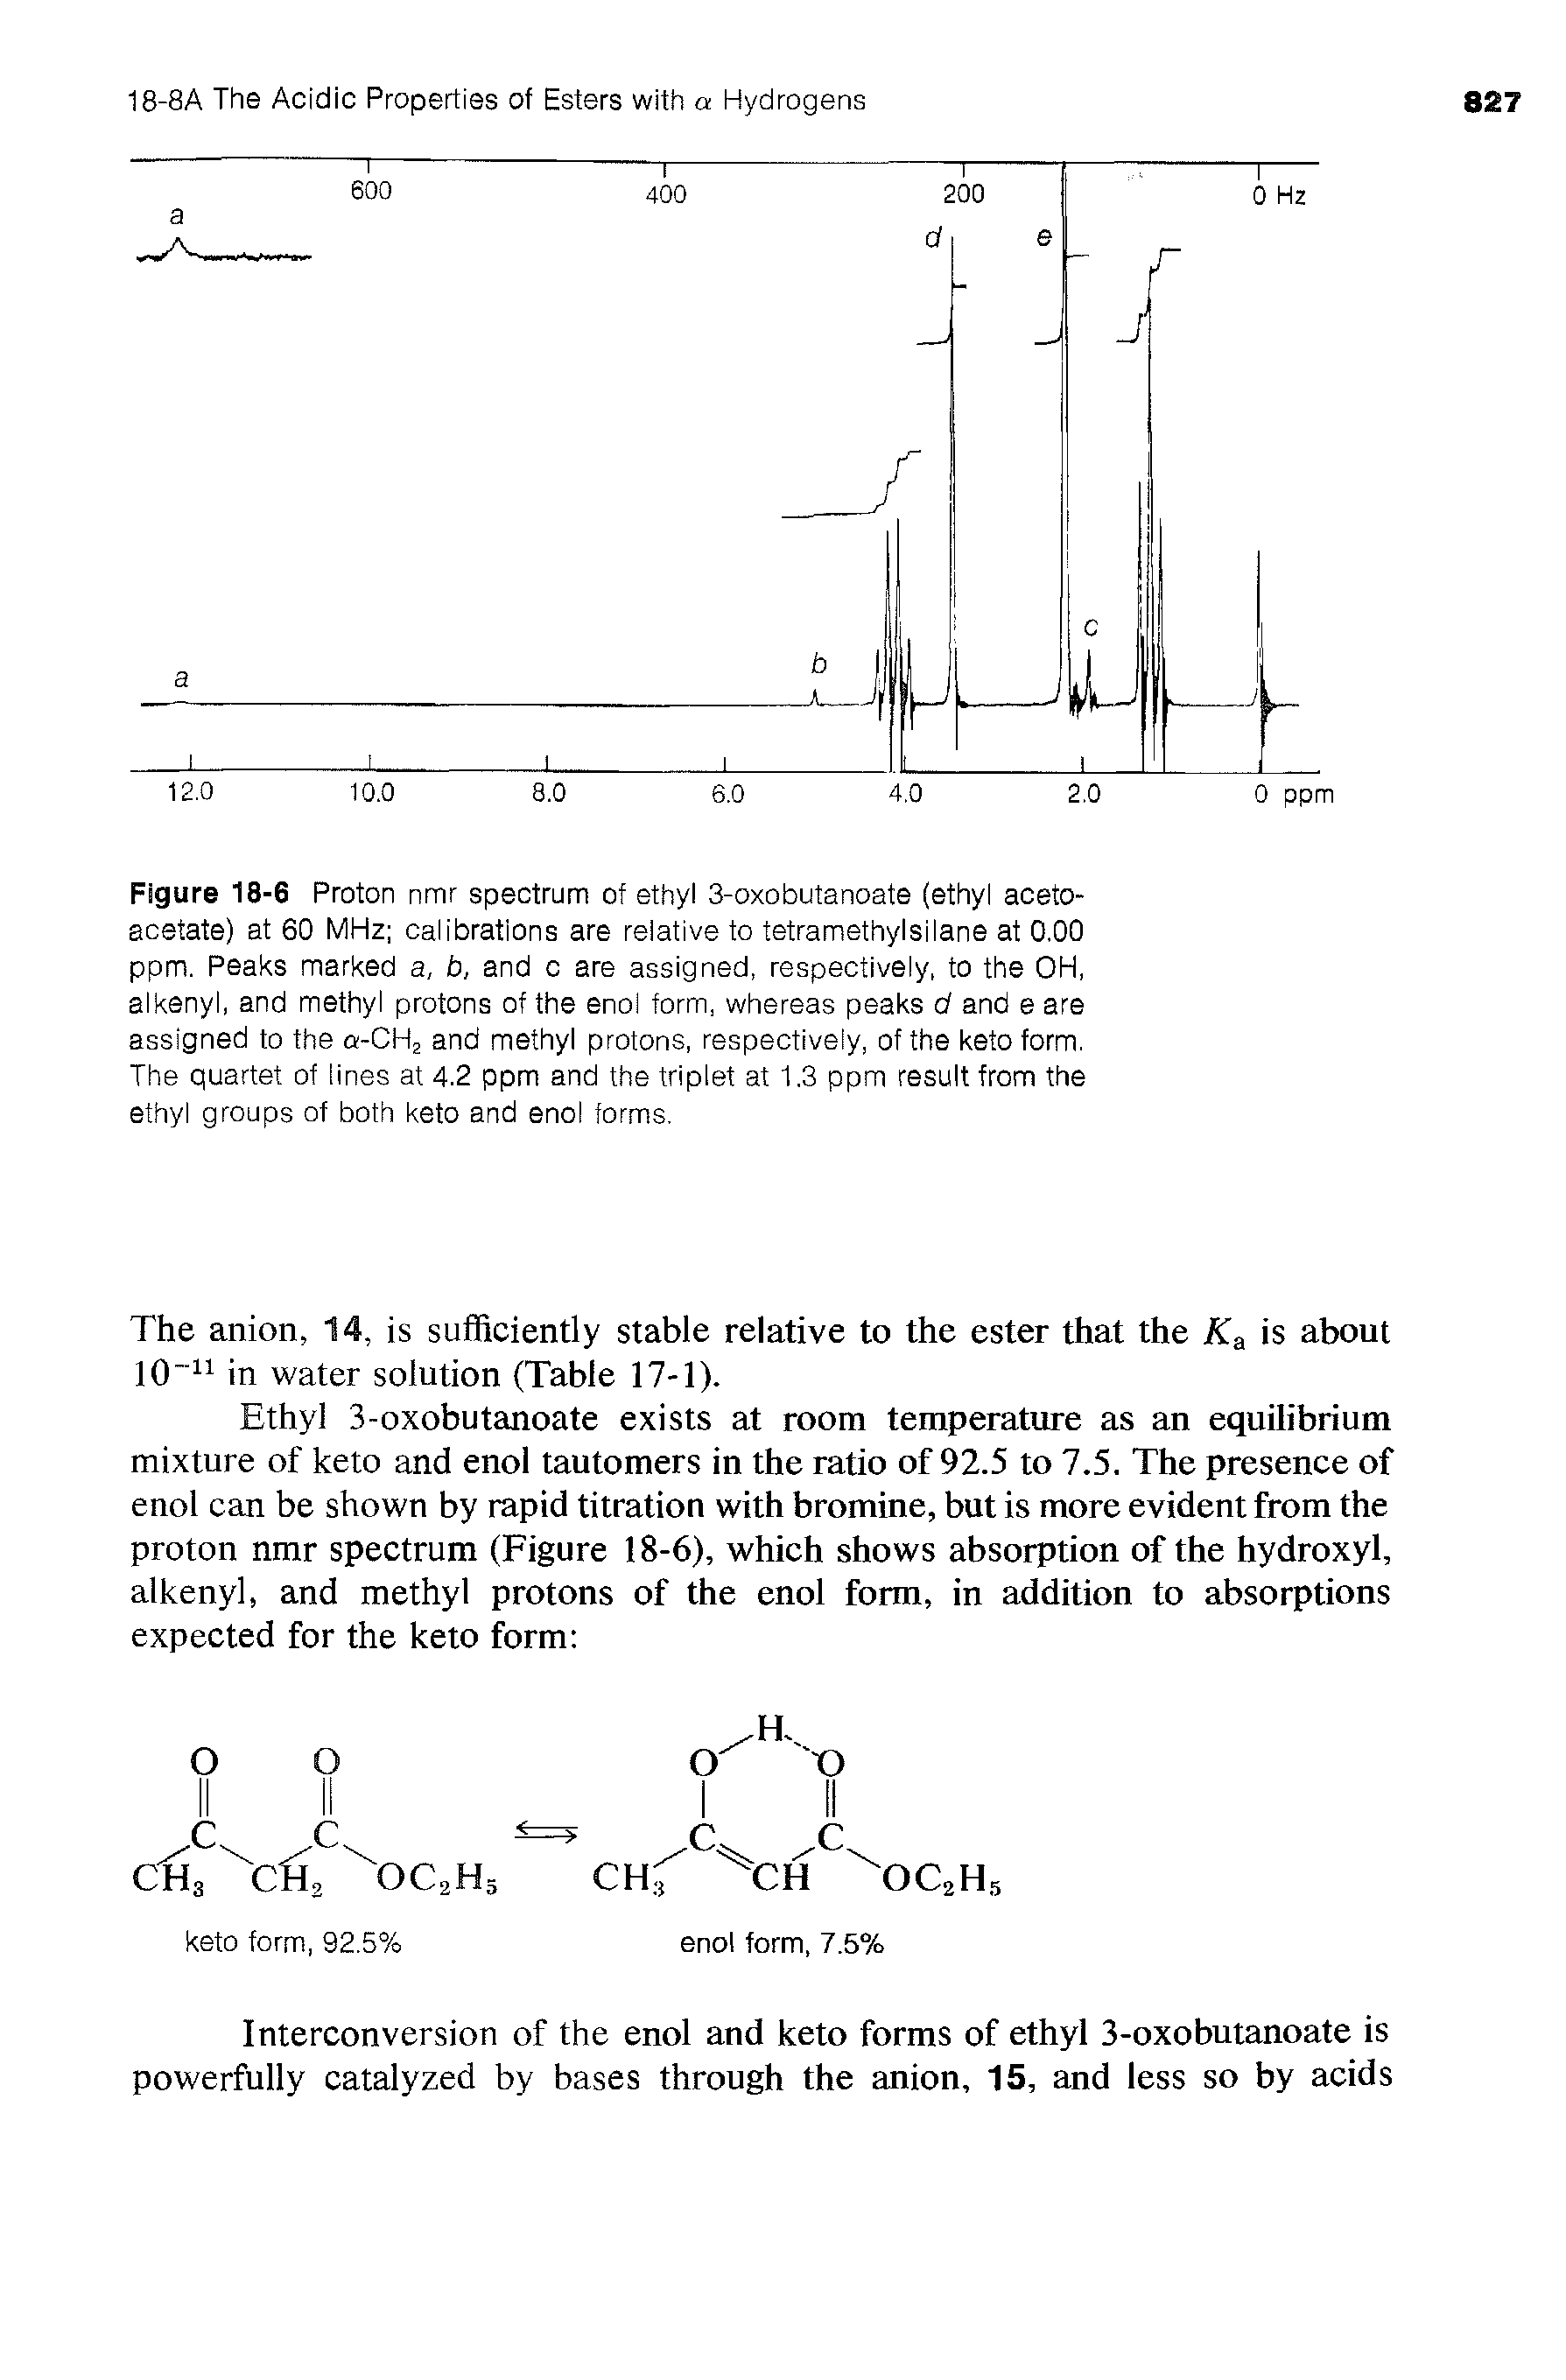 Figure 18-6 Proton nmr spectrum of ethyl 3-oxobutanoate (ethyl aceto-acetate) at 60 MHz calibrations are relative to tetramethylsilane at 0.00 ppm. Peaks marked a, b, and c are assigned, respectively, to the OH, alkenyl, and methyl protons of the enol form, whereas peaks d and e are assigned to the a-CH2 and methyl protons, respectively, of the ketoform. The quartet of lines at 4.2 ppm and the triplet at 1.3 ppm result from the ethyl groups of both keto and enol forms.